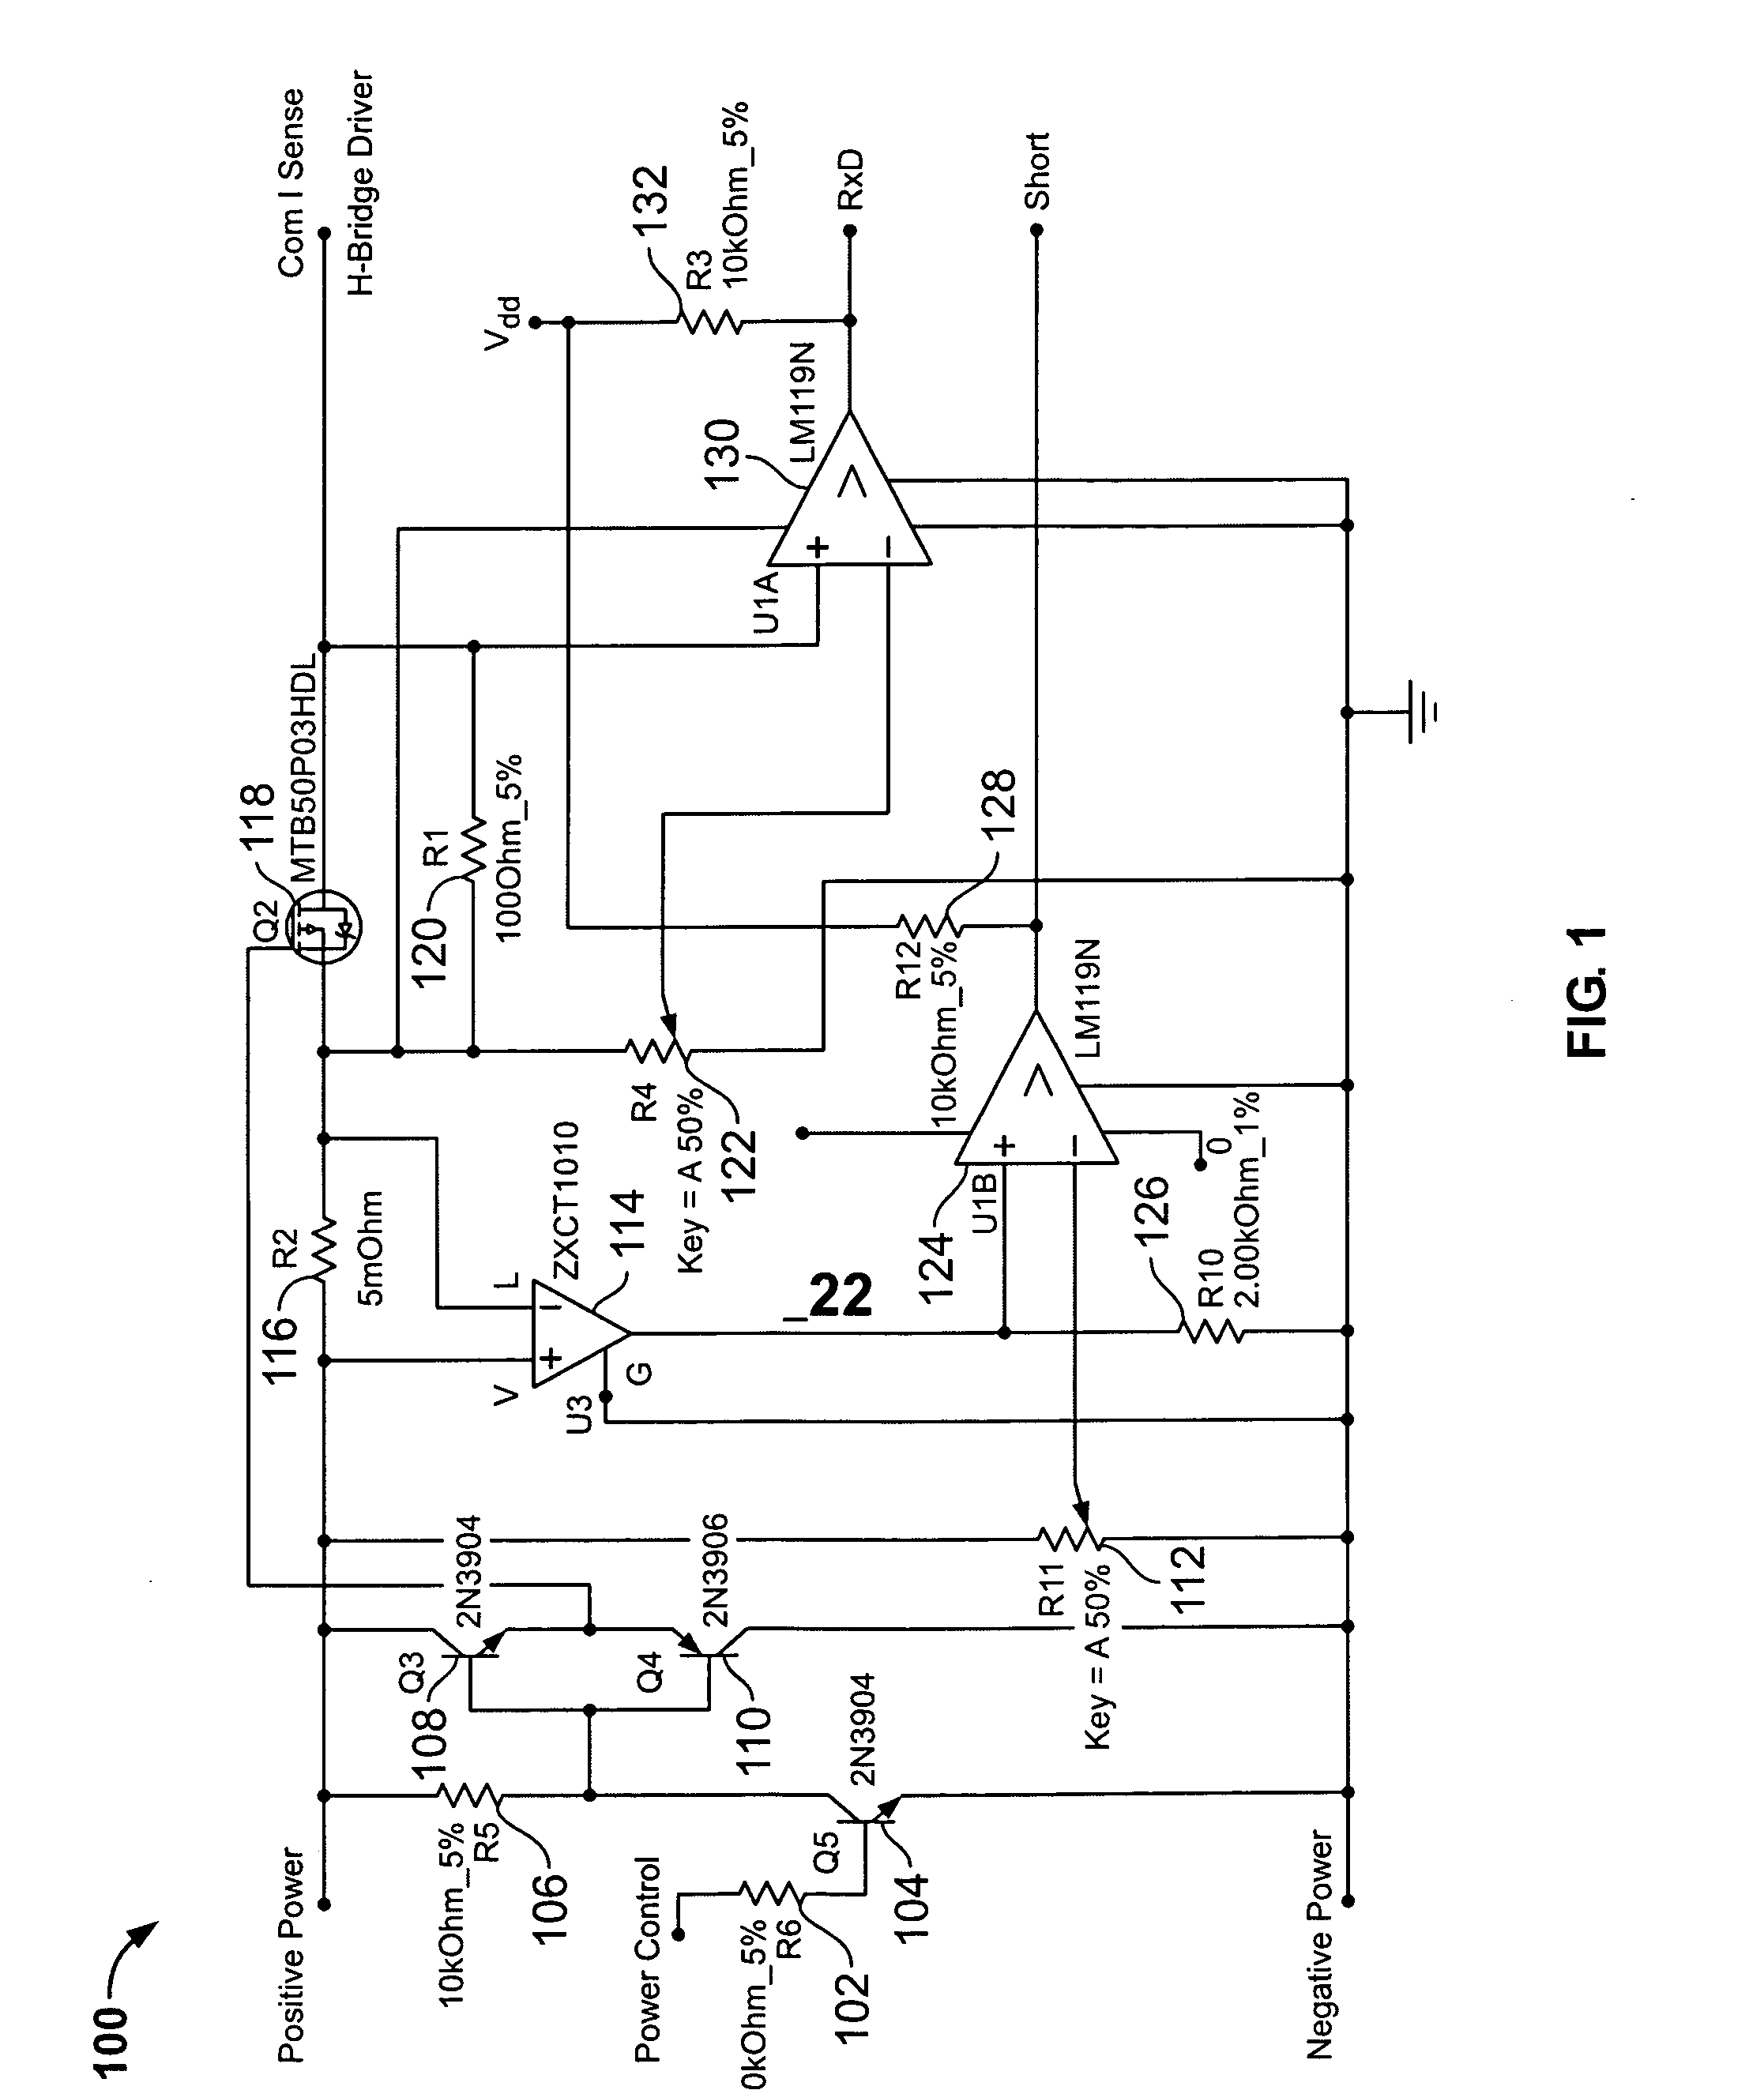 Method and system for bidirectional communications and power transmission